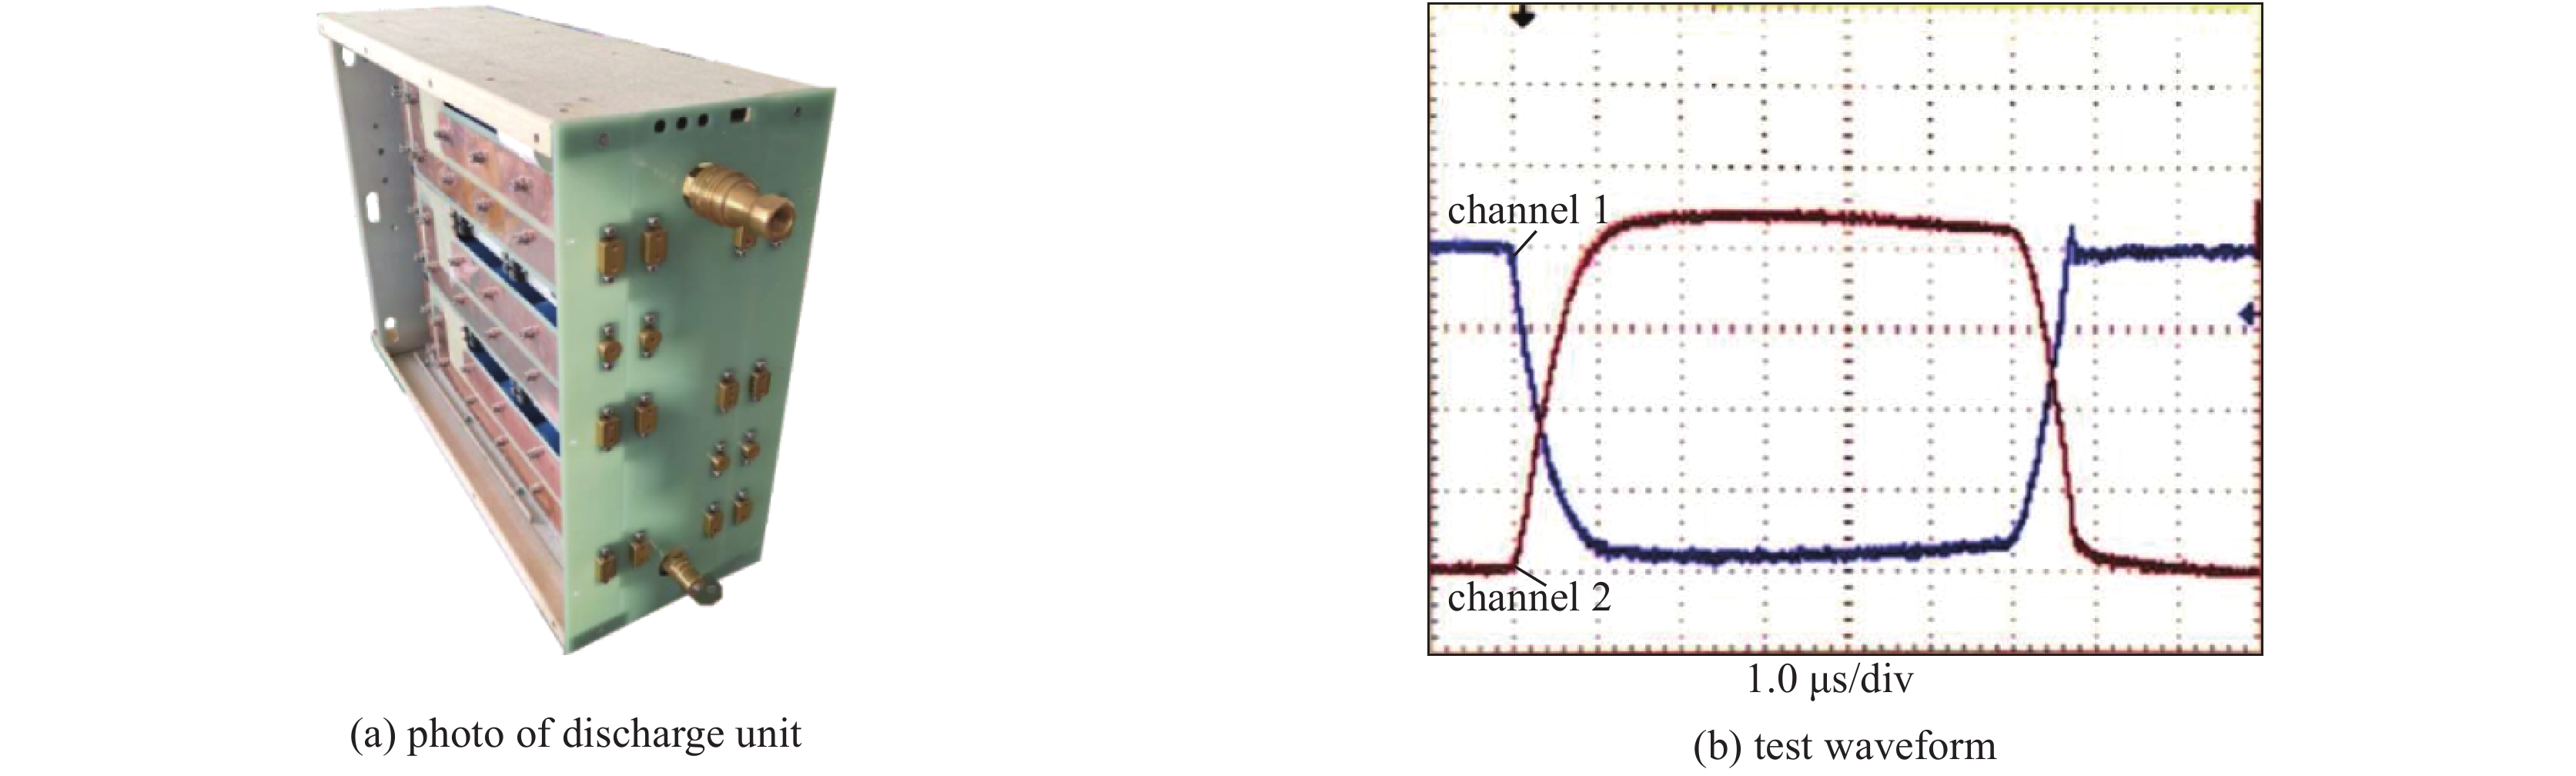 Photo and test waveforms of discharge module